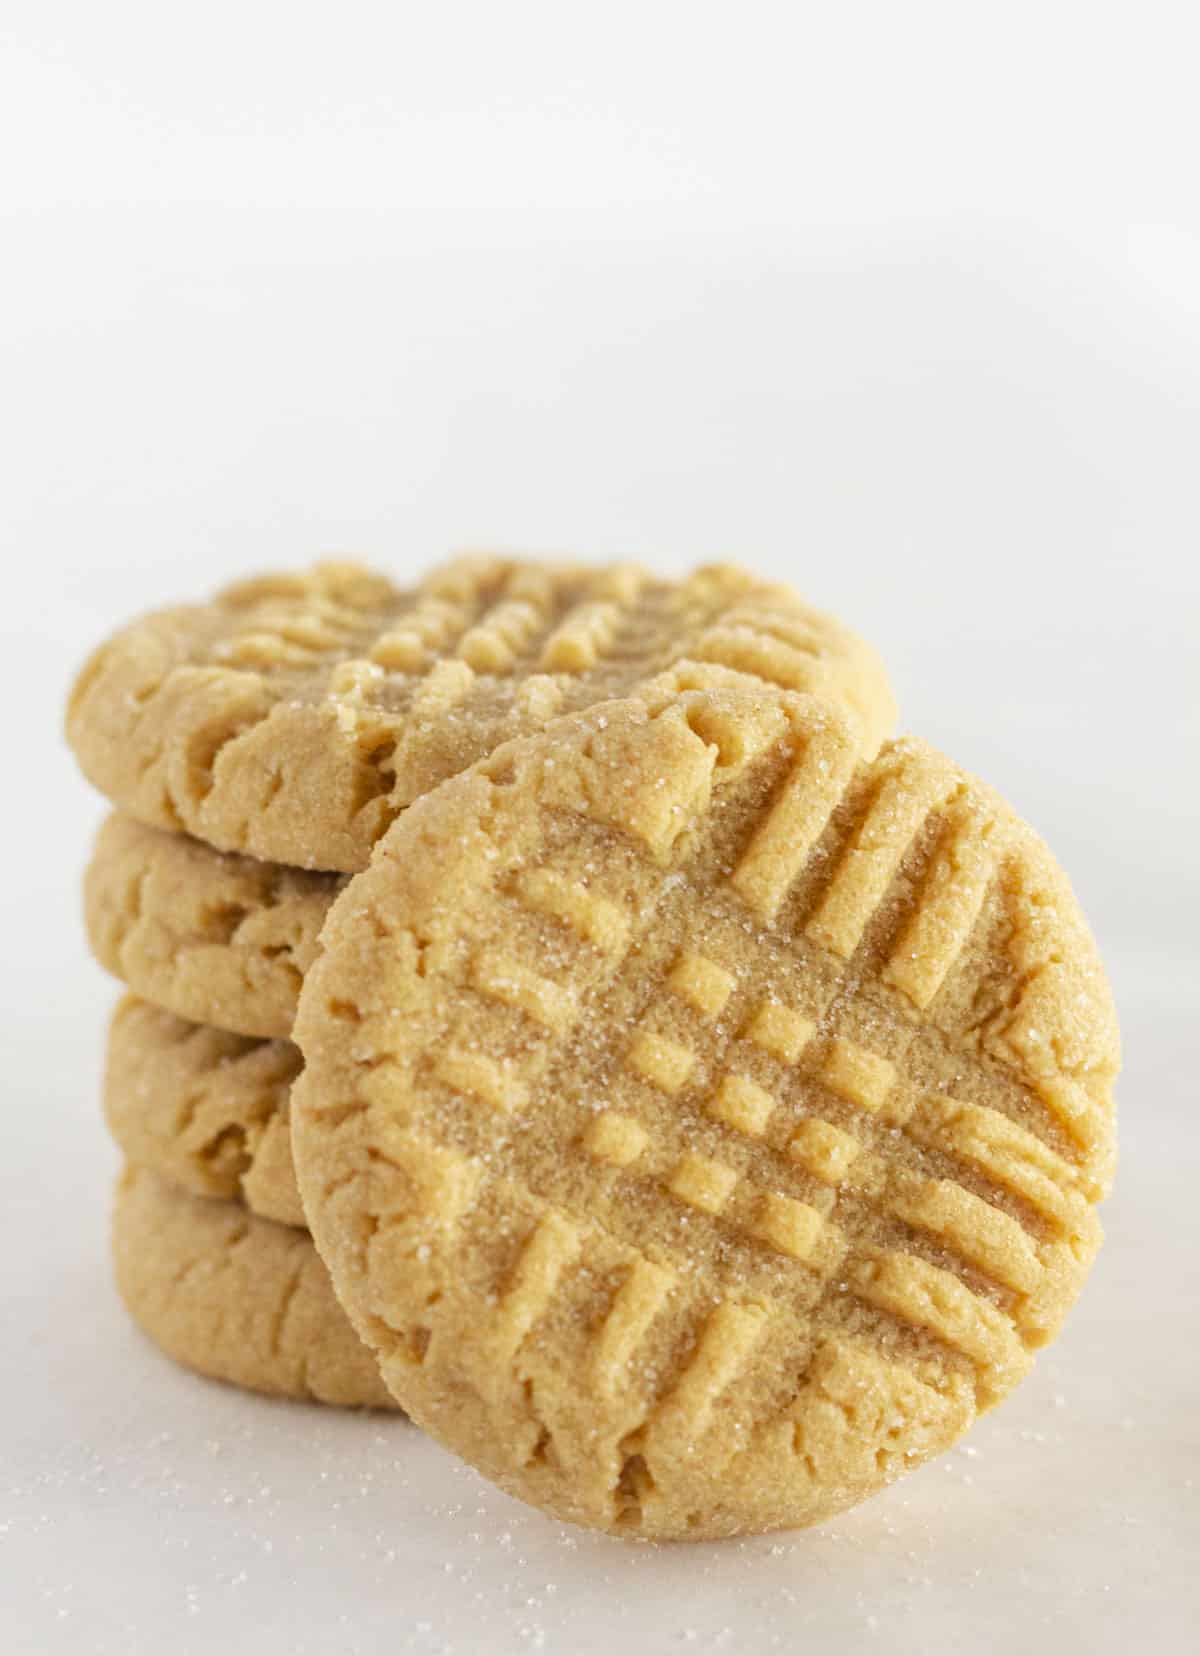 4 Peanut Butter Cookies made with 4 ingredients.